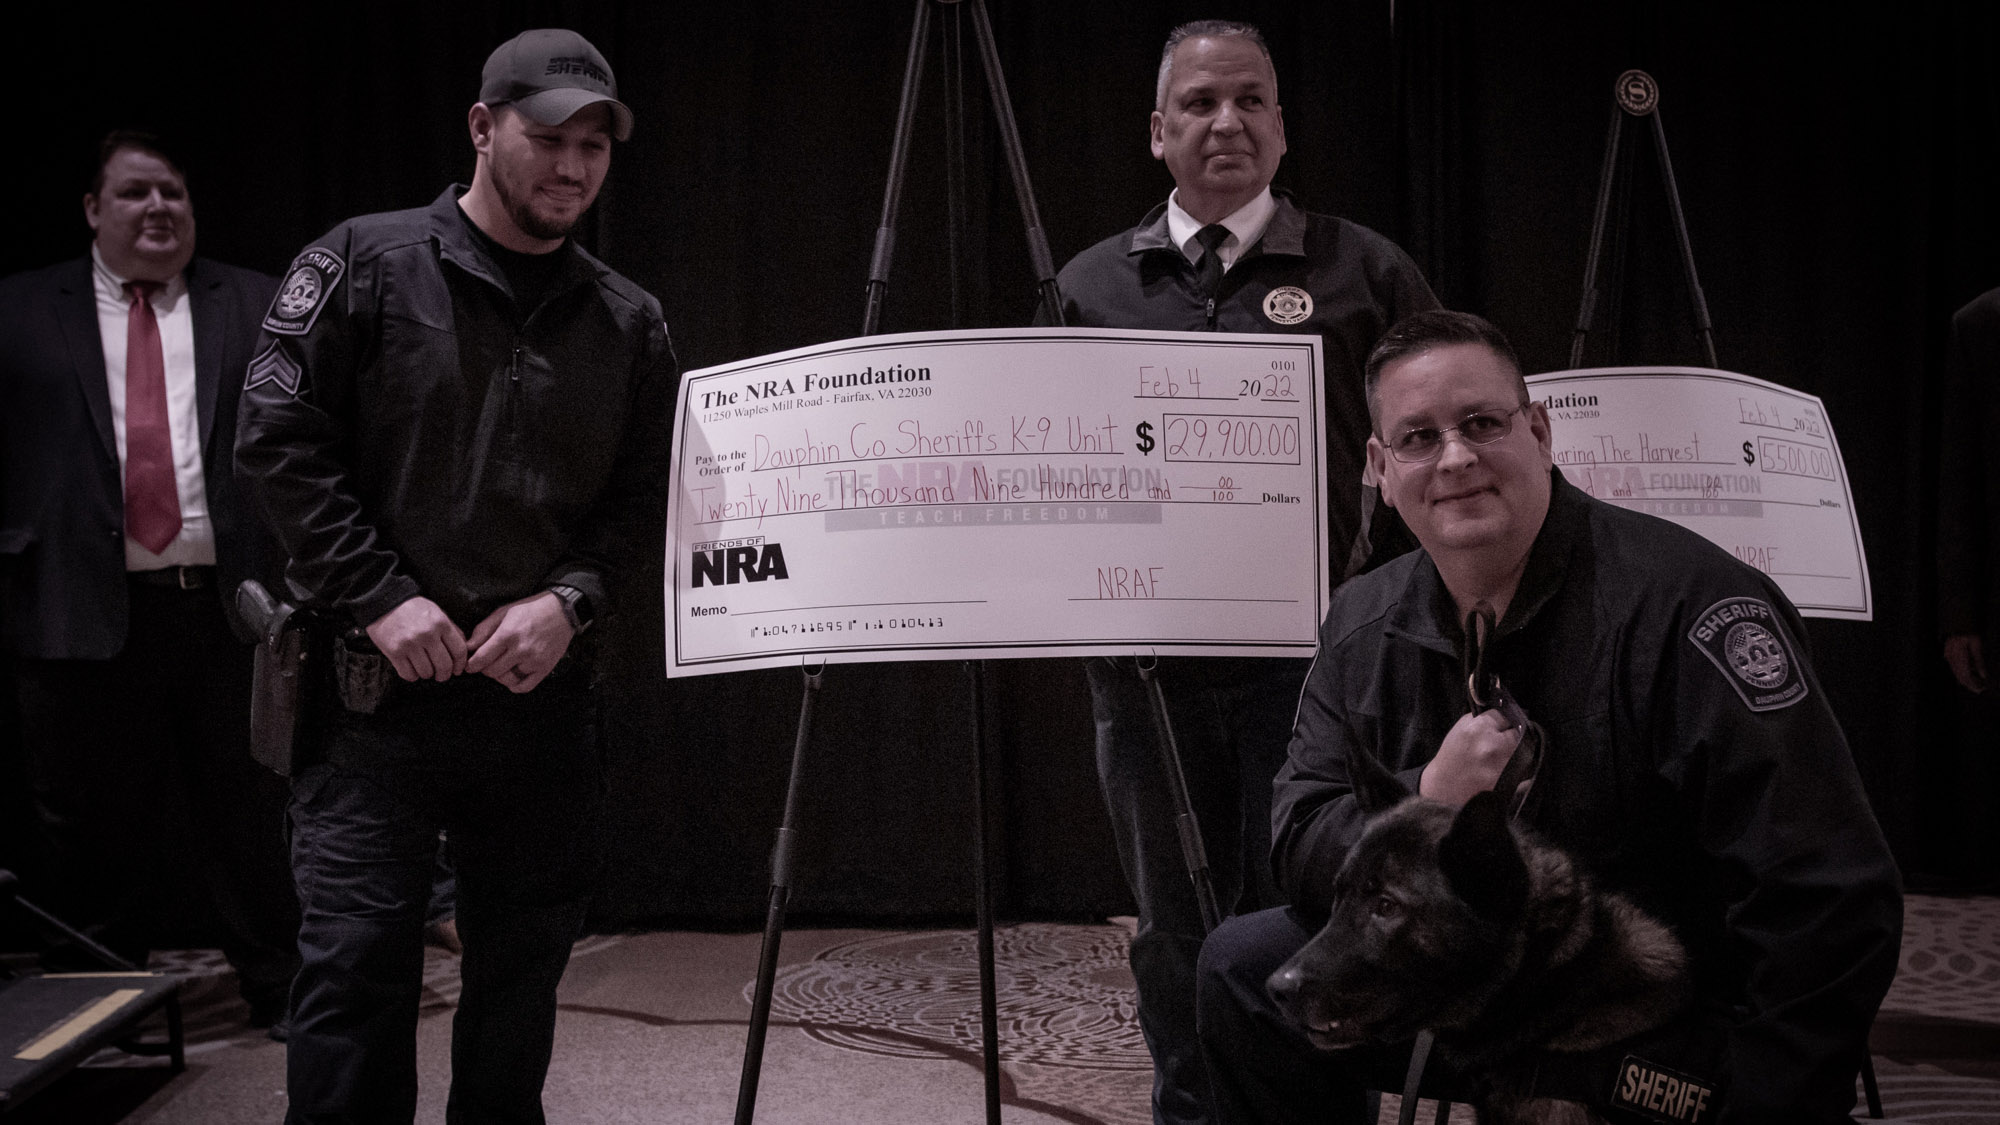 During the ceremony, members of the Dauphin County Sheriff’s Department K-9 Unit were presented a $29,900 grant from the NRA Foundation.